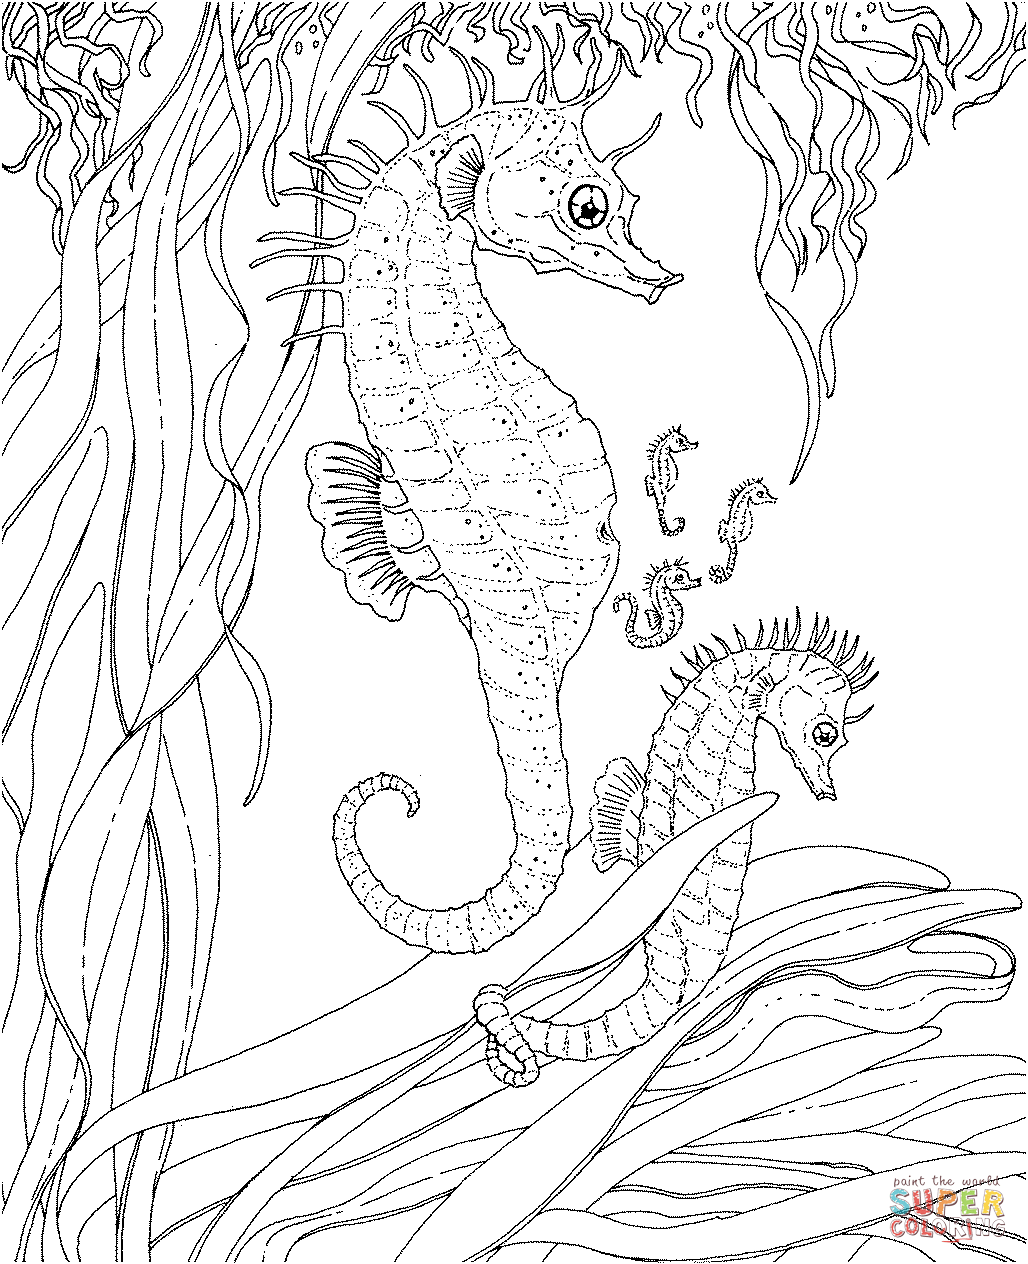 Seahorse coloring pages to download and print for free